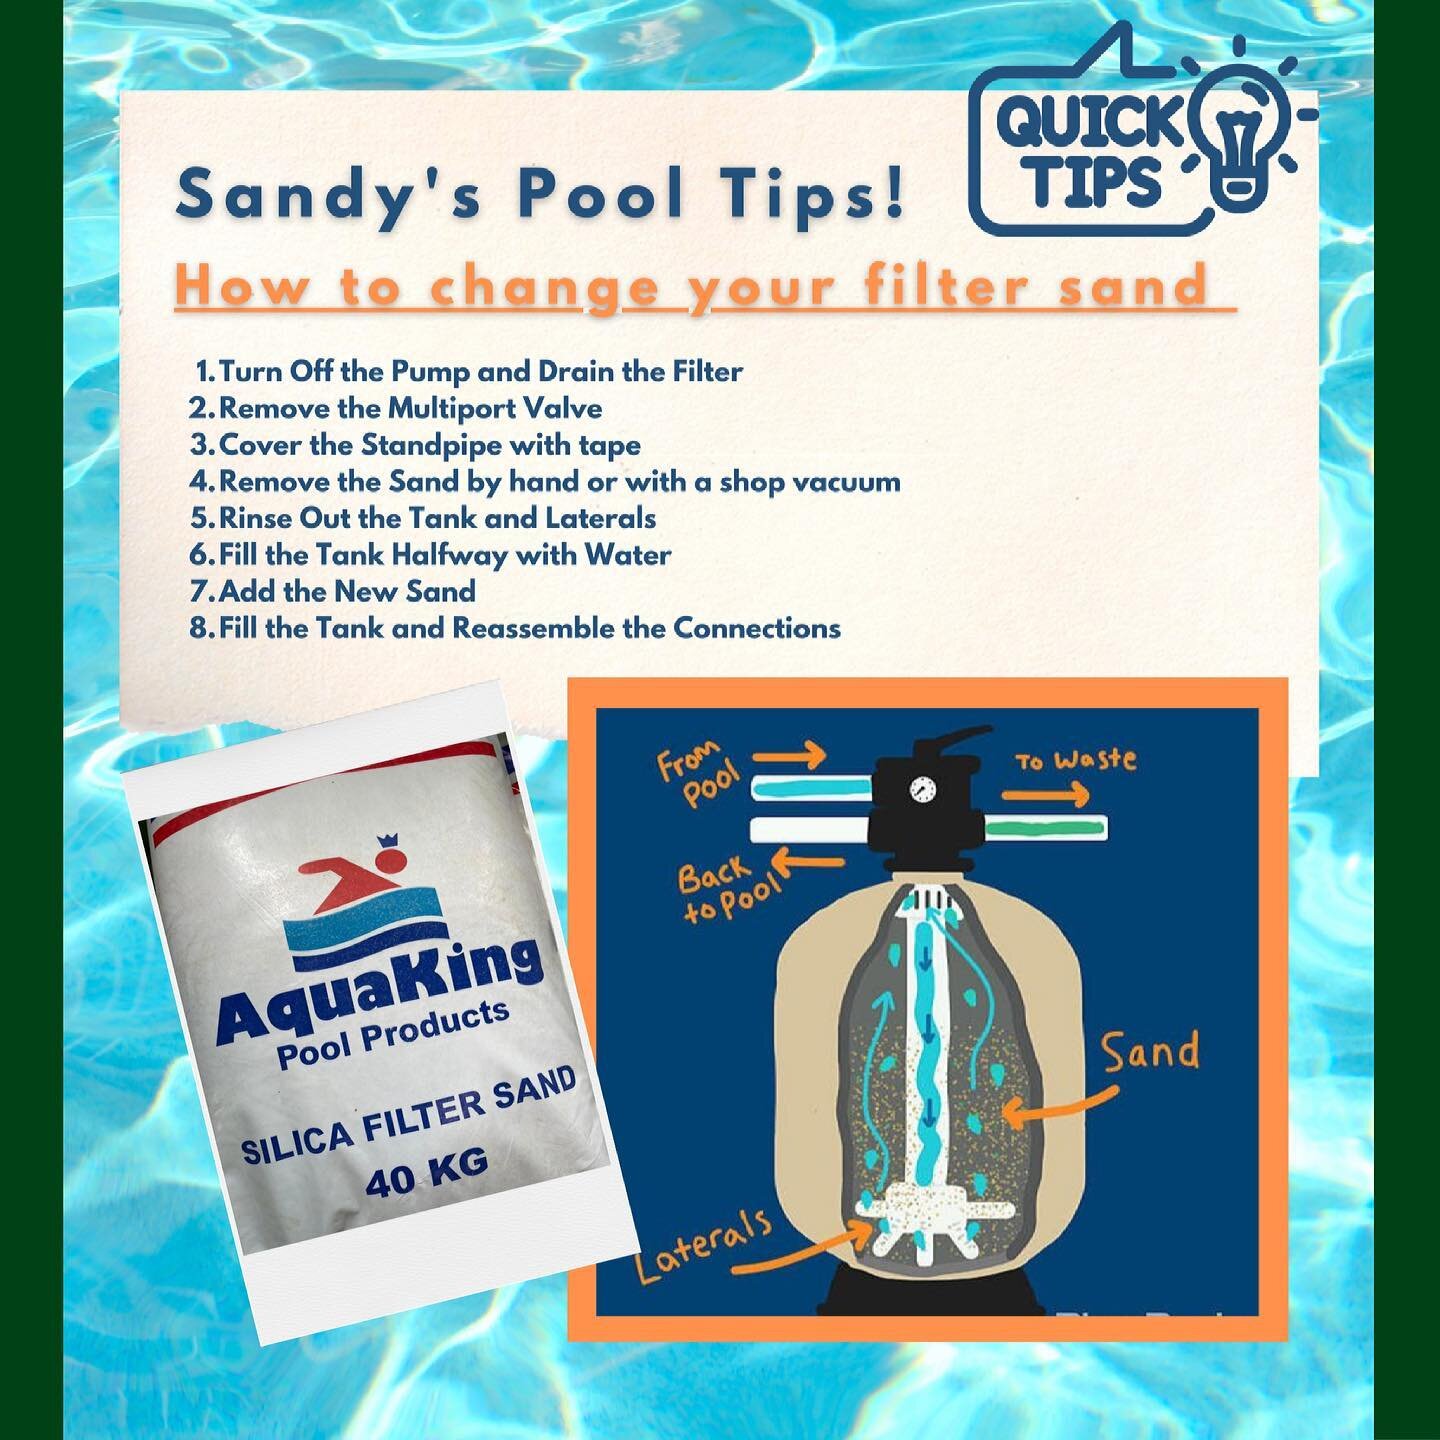 Sandy's Pool Tips! How to change your filter sand! To maintain a crystal clear pool its necessary to change your filter sand every so often. Heres some simple tips to help you get the job done! 🌊 Silica Filter Sand available at Sandy's NOW, Call/Wha